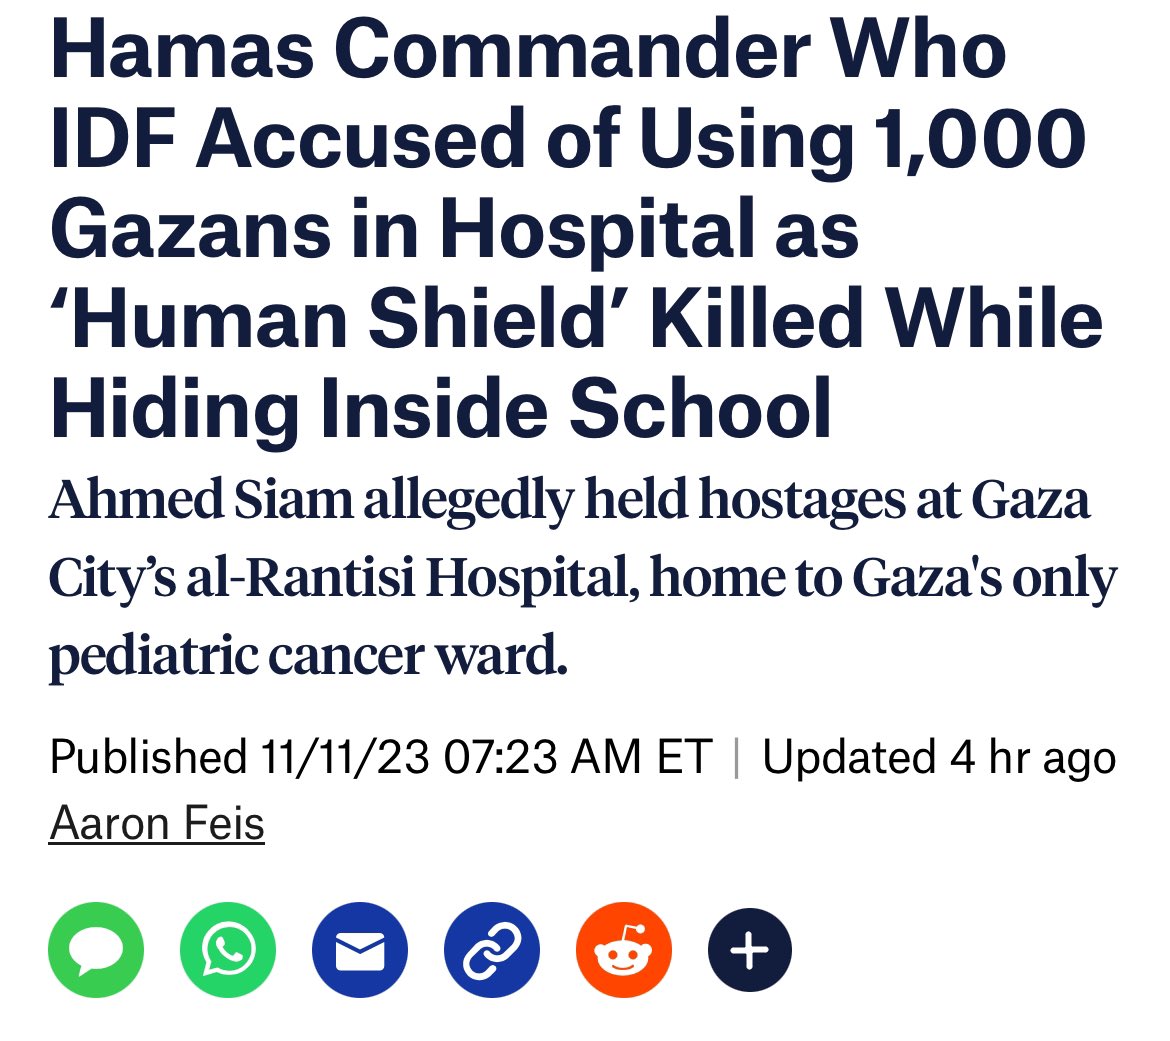 #CommieBastard @jacksonhinklle wants to paint the #IsraelHamasWar as a simple genocide?  Fuck him.  This is what #Israel is dealing with.  Animals.  #Hamas has no regard for the #Palestinians - and this is why no other #Arab country wants anything to do with them. #HamasisISIS